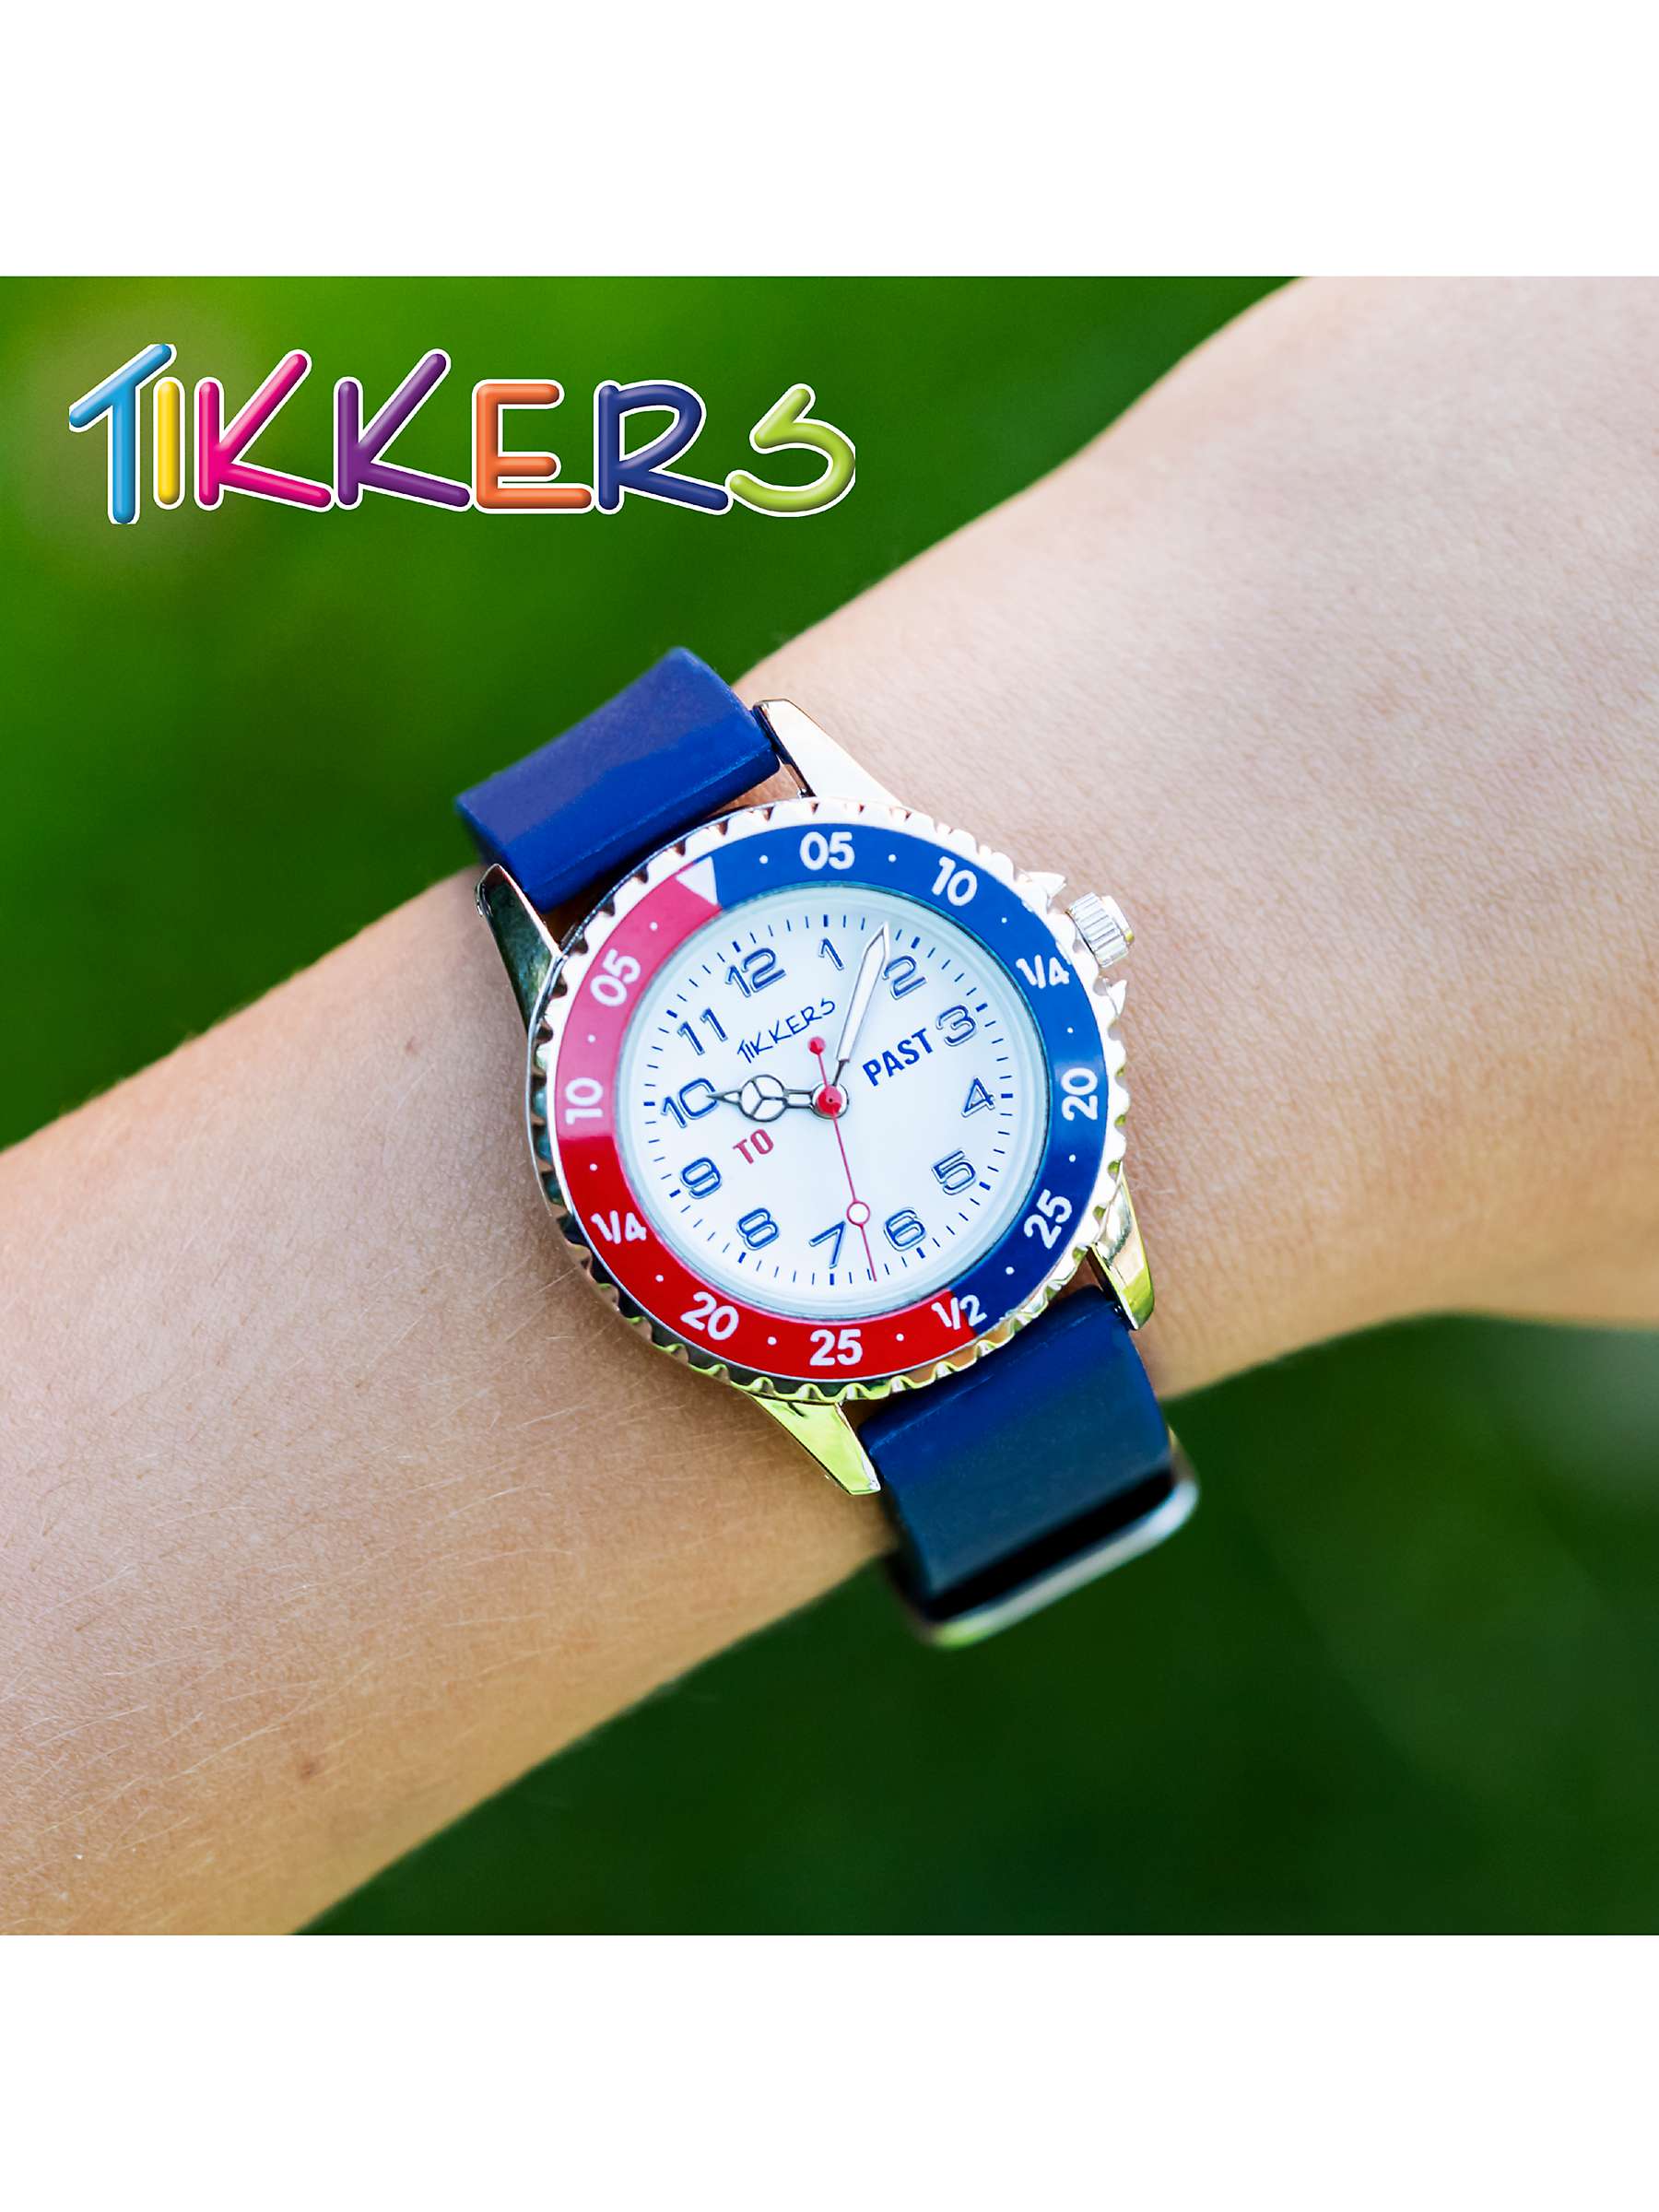 Buy Tikkers TK0140 Children's Silicone Strap Watch, Navy/White Online at johnlewis.com